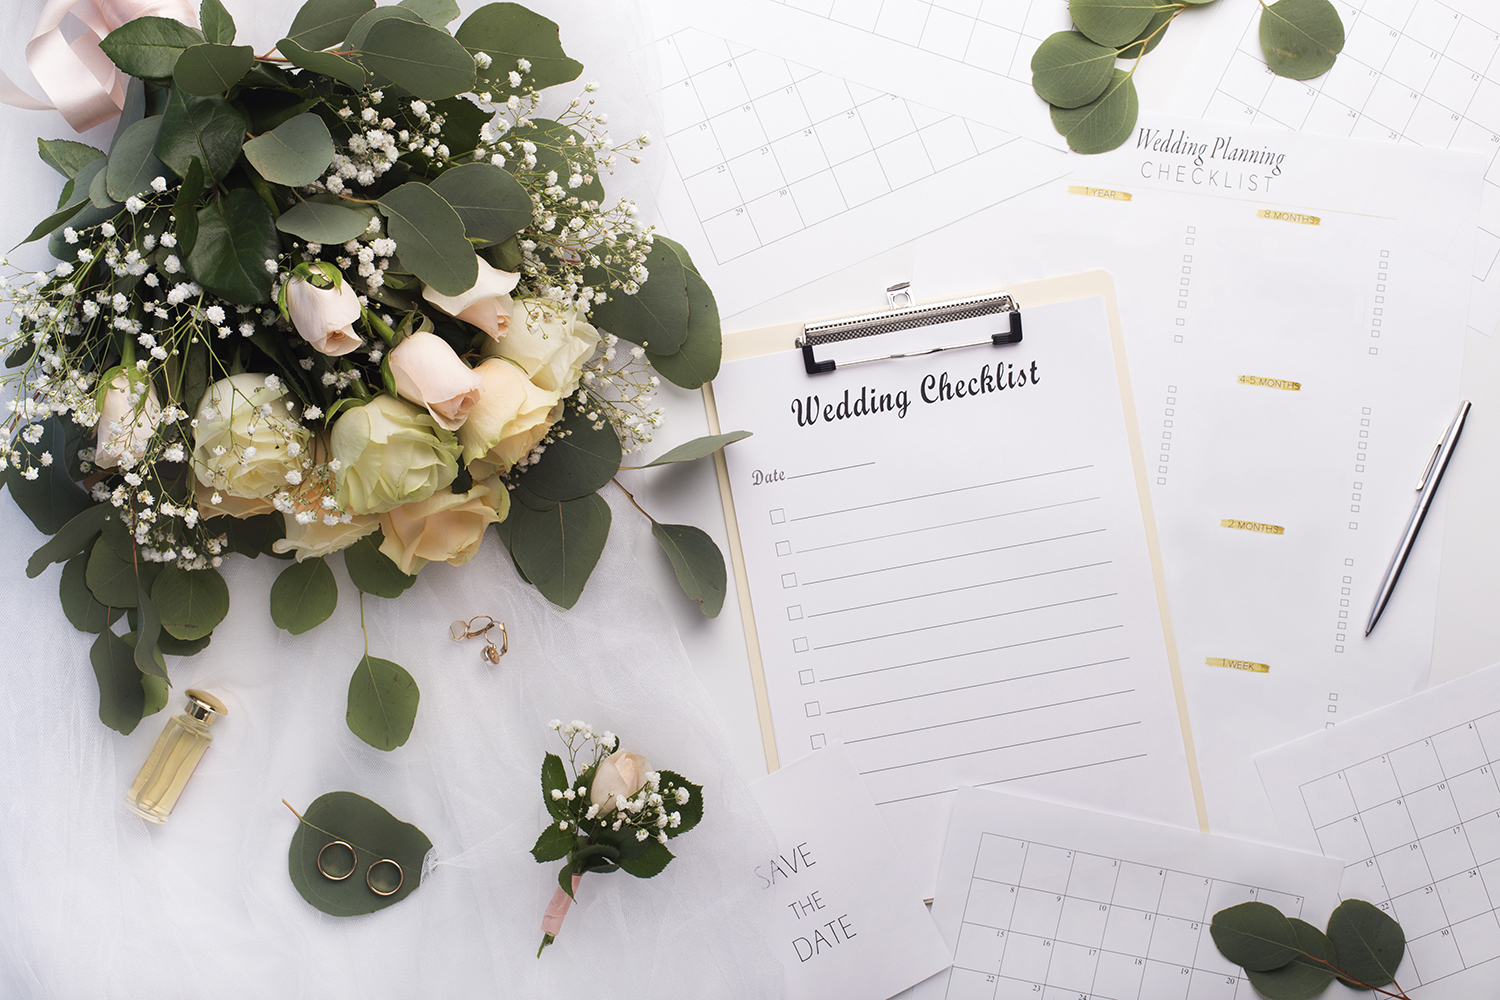 5 Things to Consider When Hiring a Wedding Planner